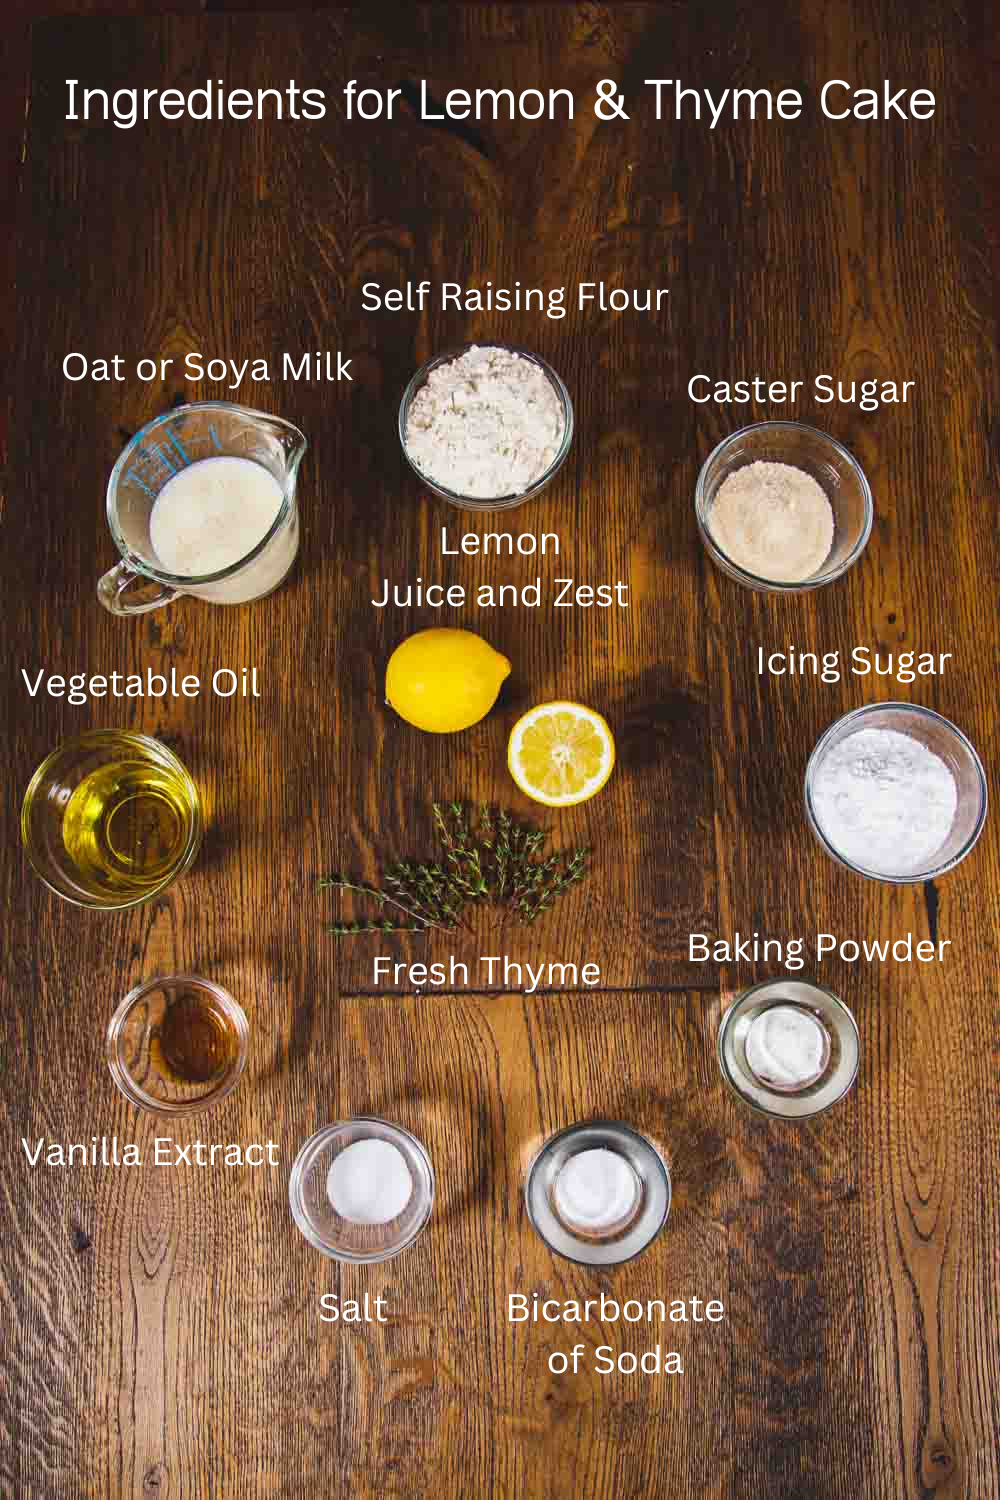 The ingredients for Lemon and Thyme Cake are laid out on a table and labelled.